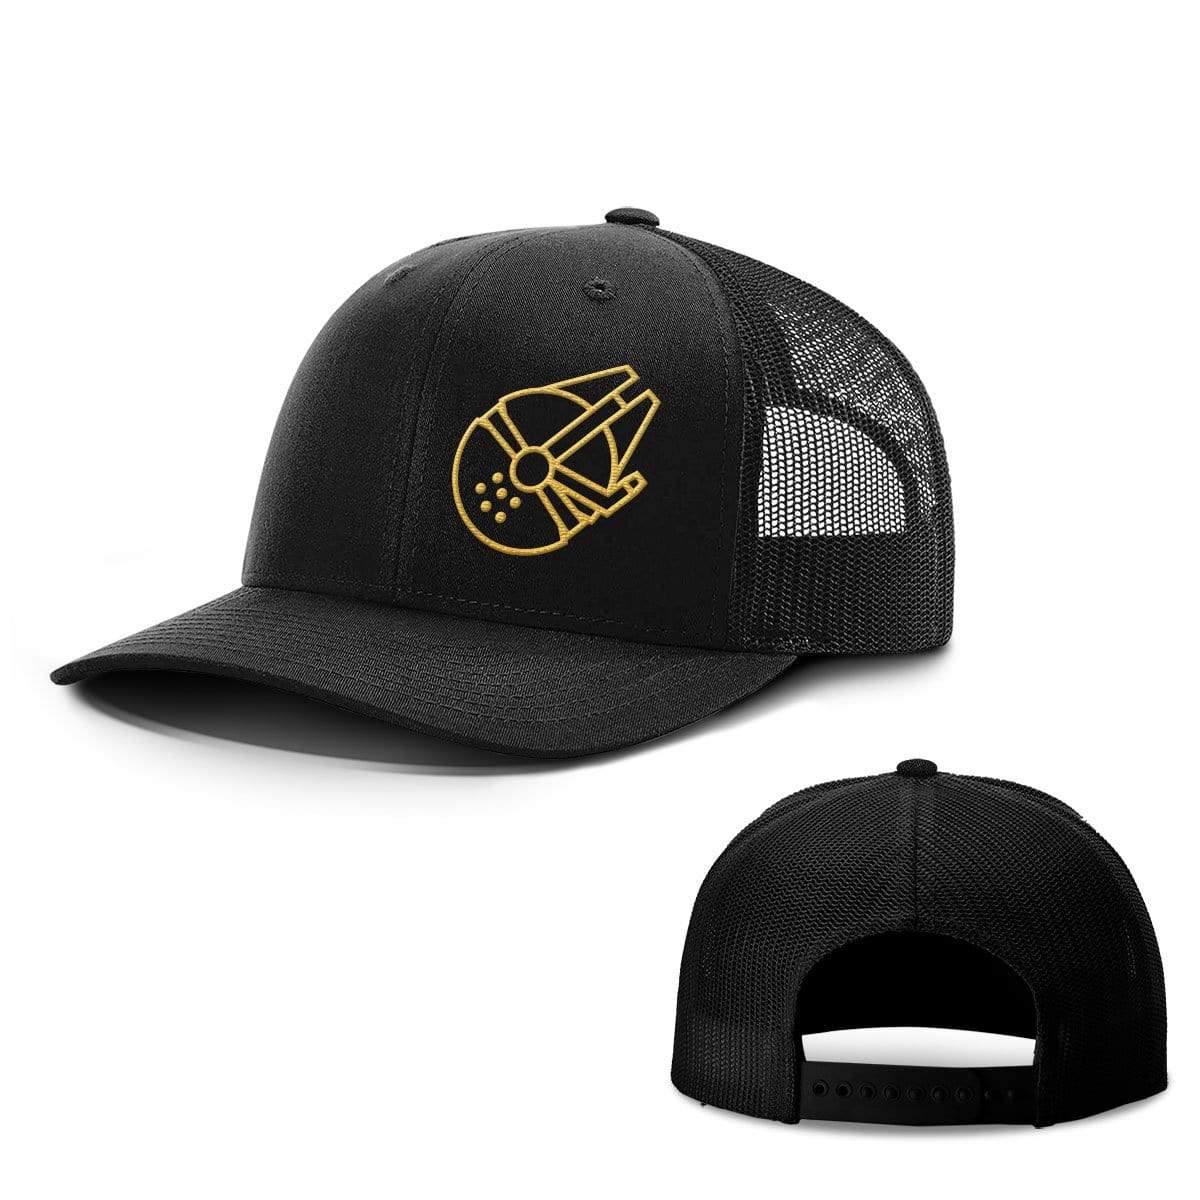 SunFrog-Busted Hats Snapback / Full Black / One Size Millenium Falcon Hats